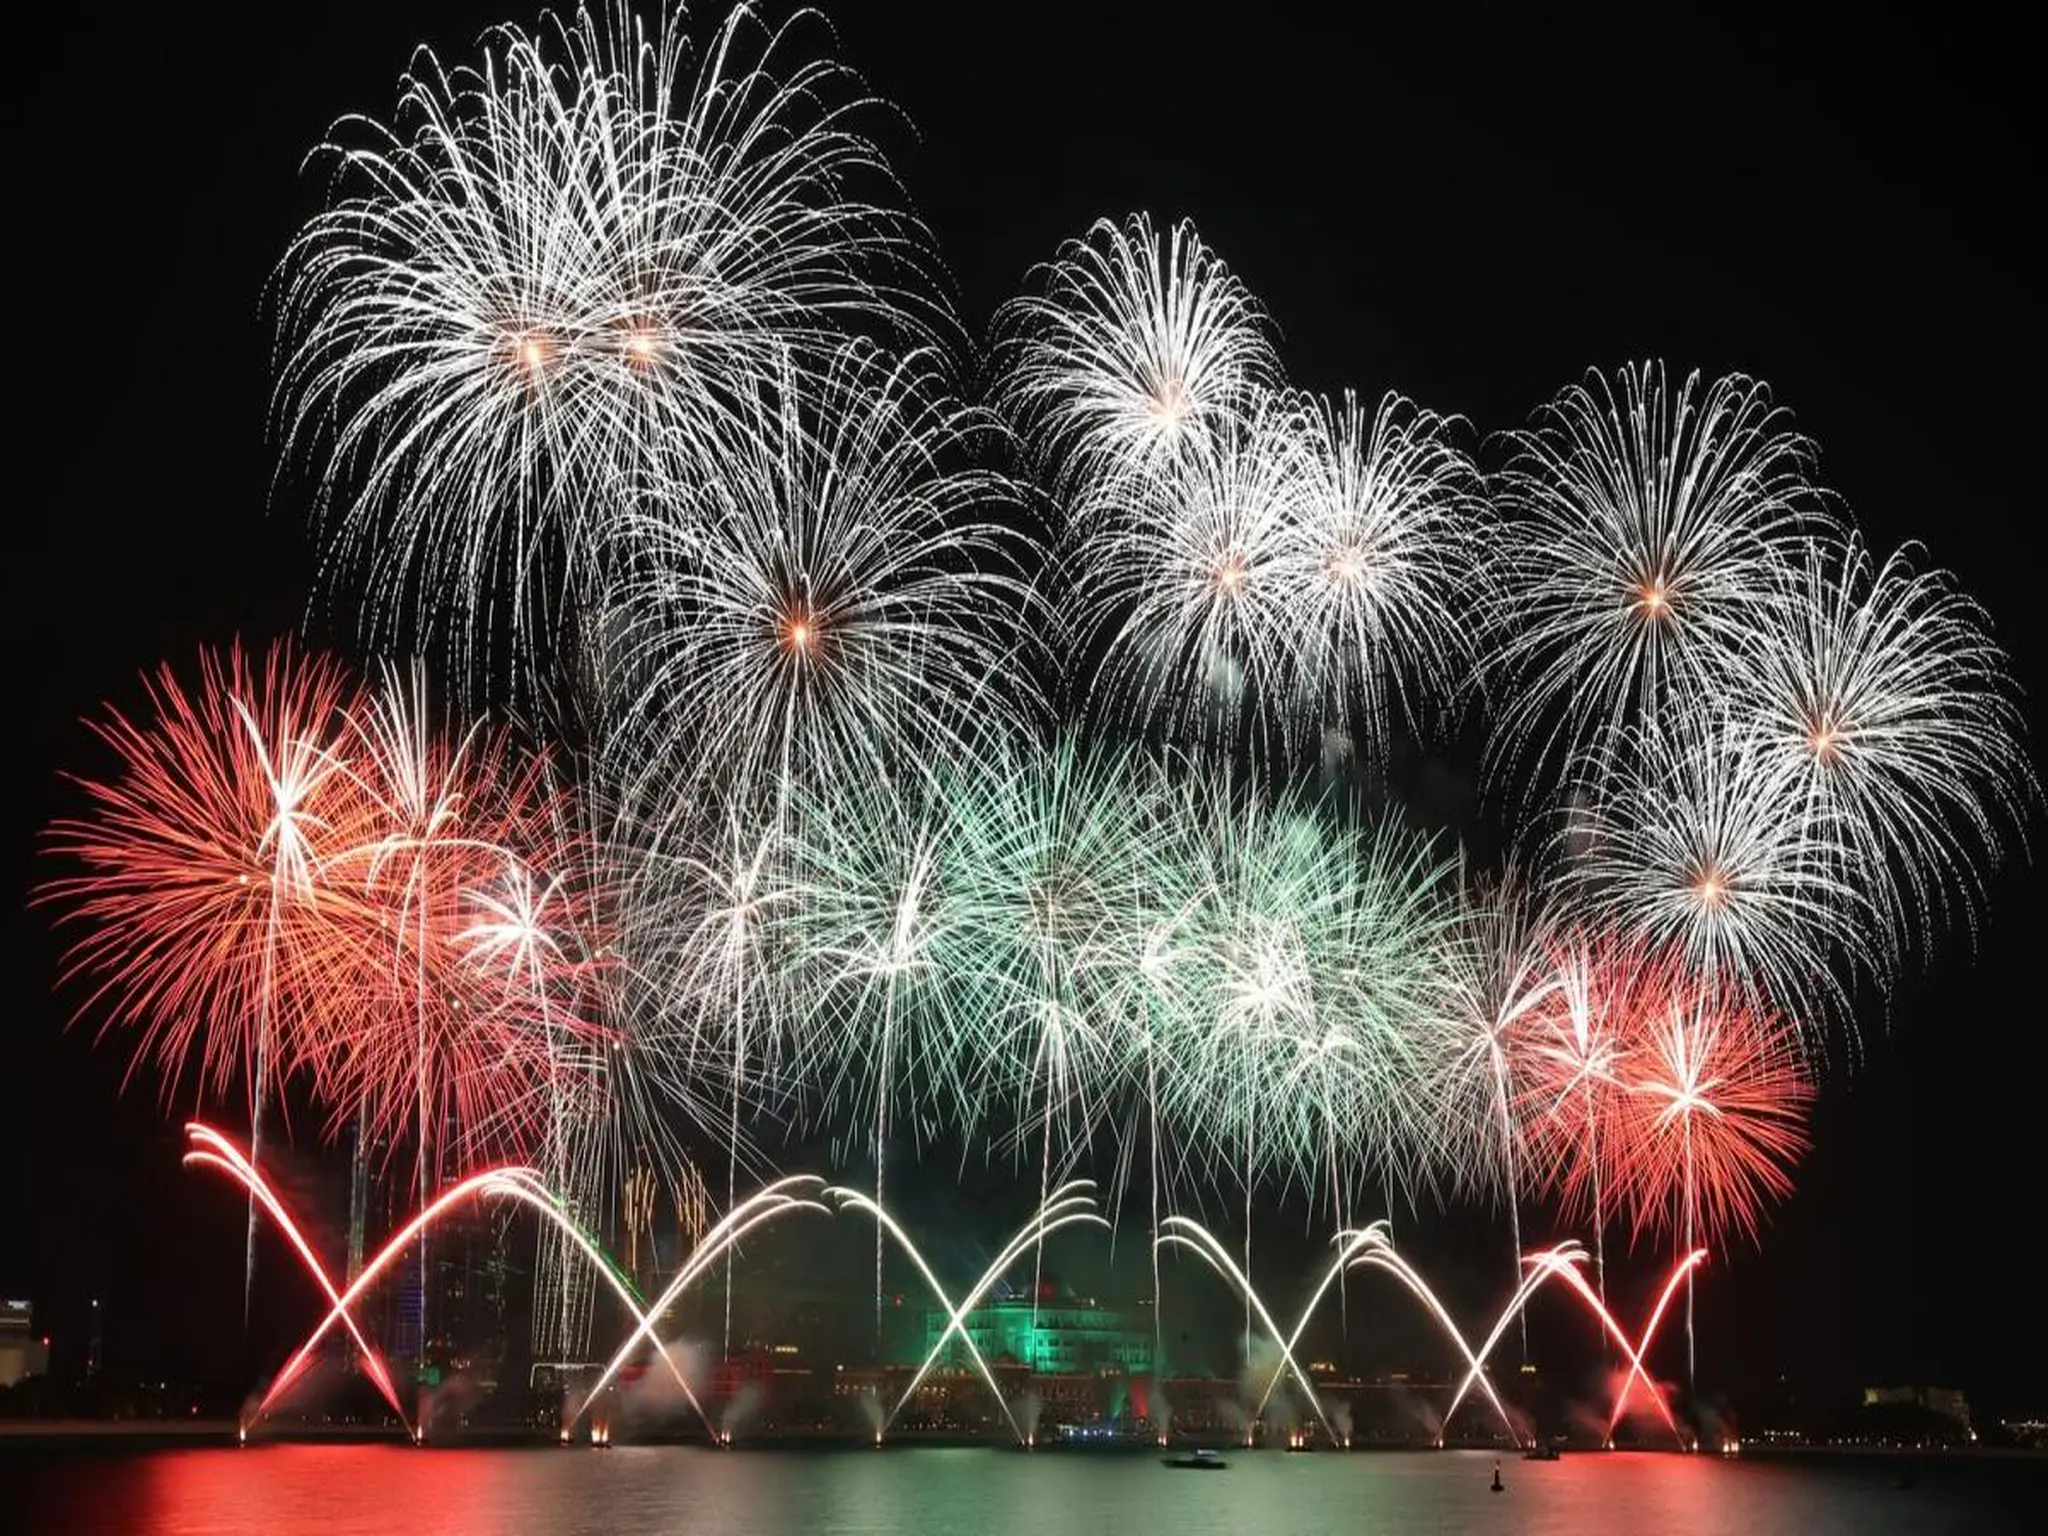 UAE: Dh100,000 fine, up to one year in prison for unauthorised fireworks sales